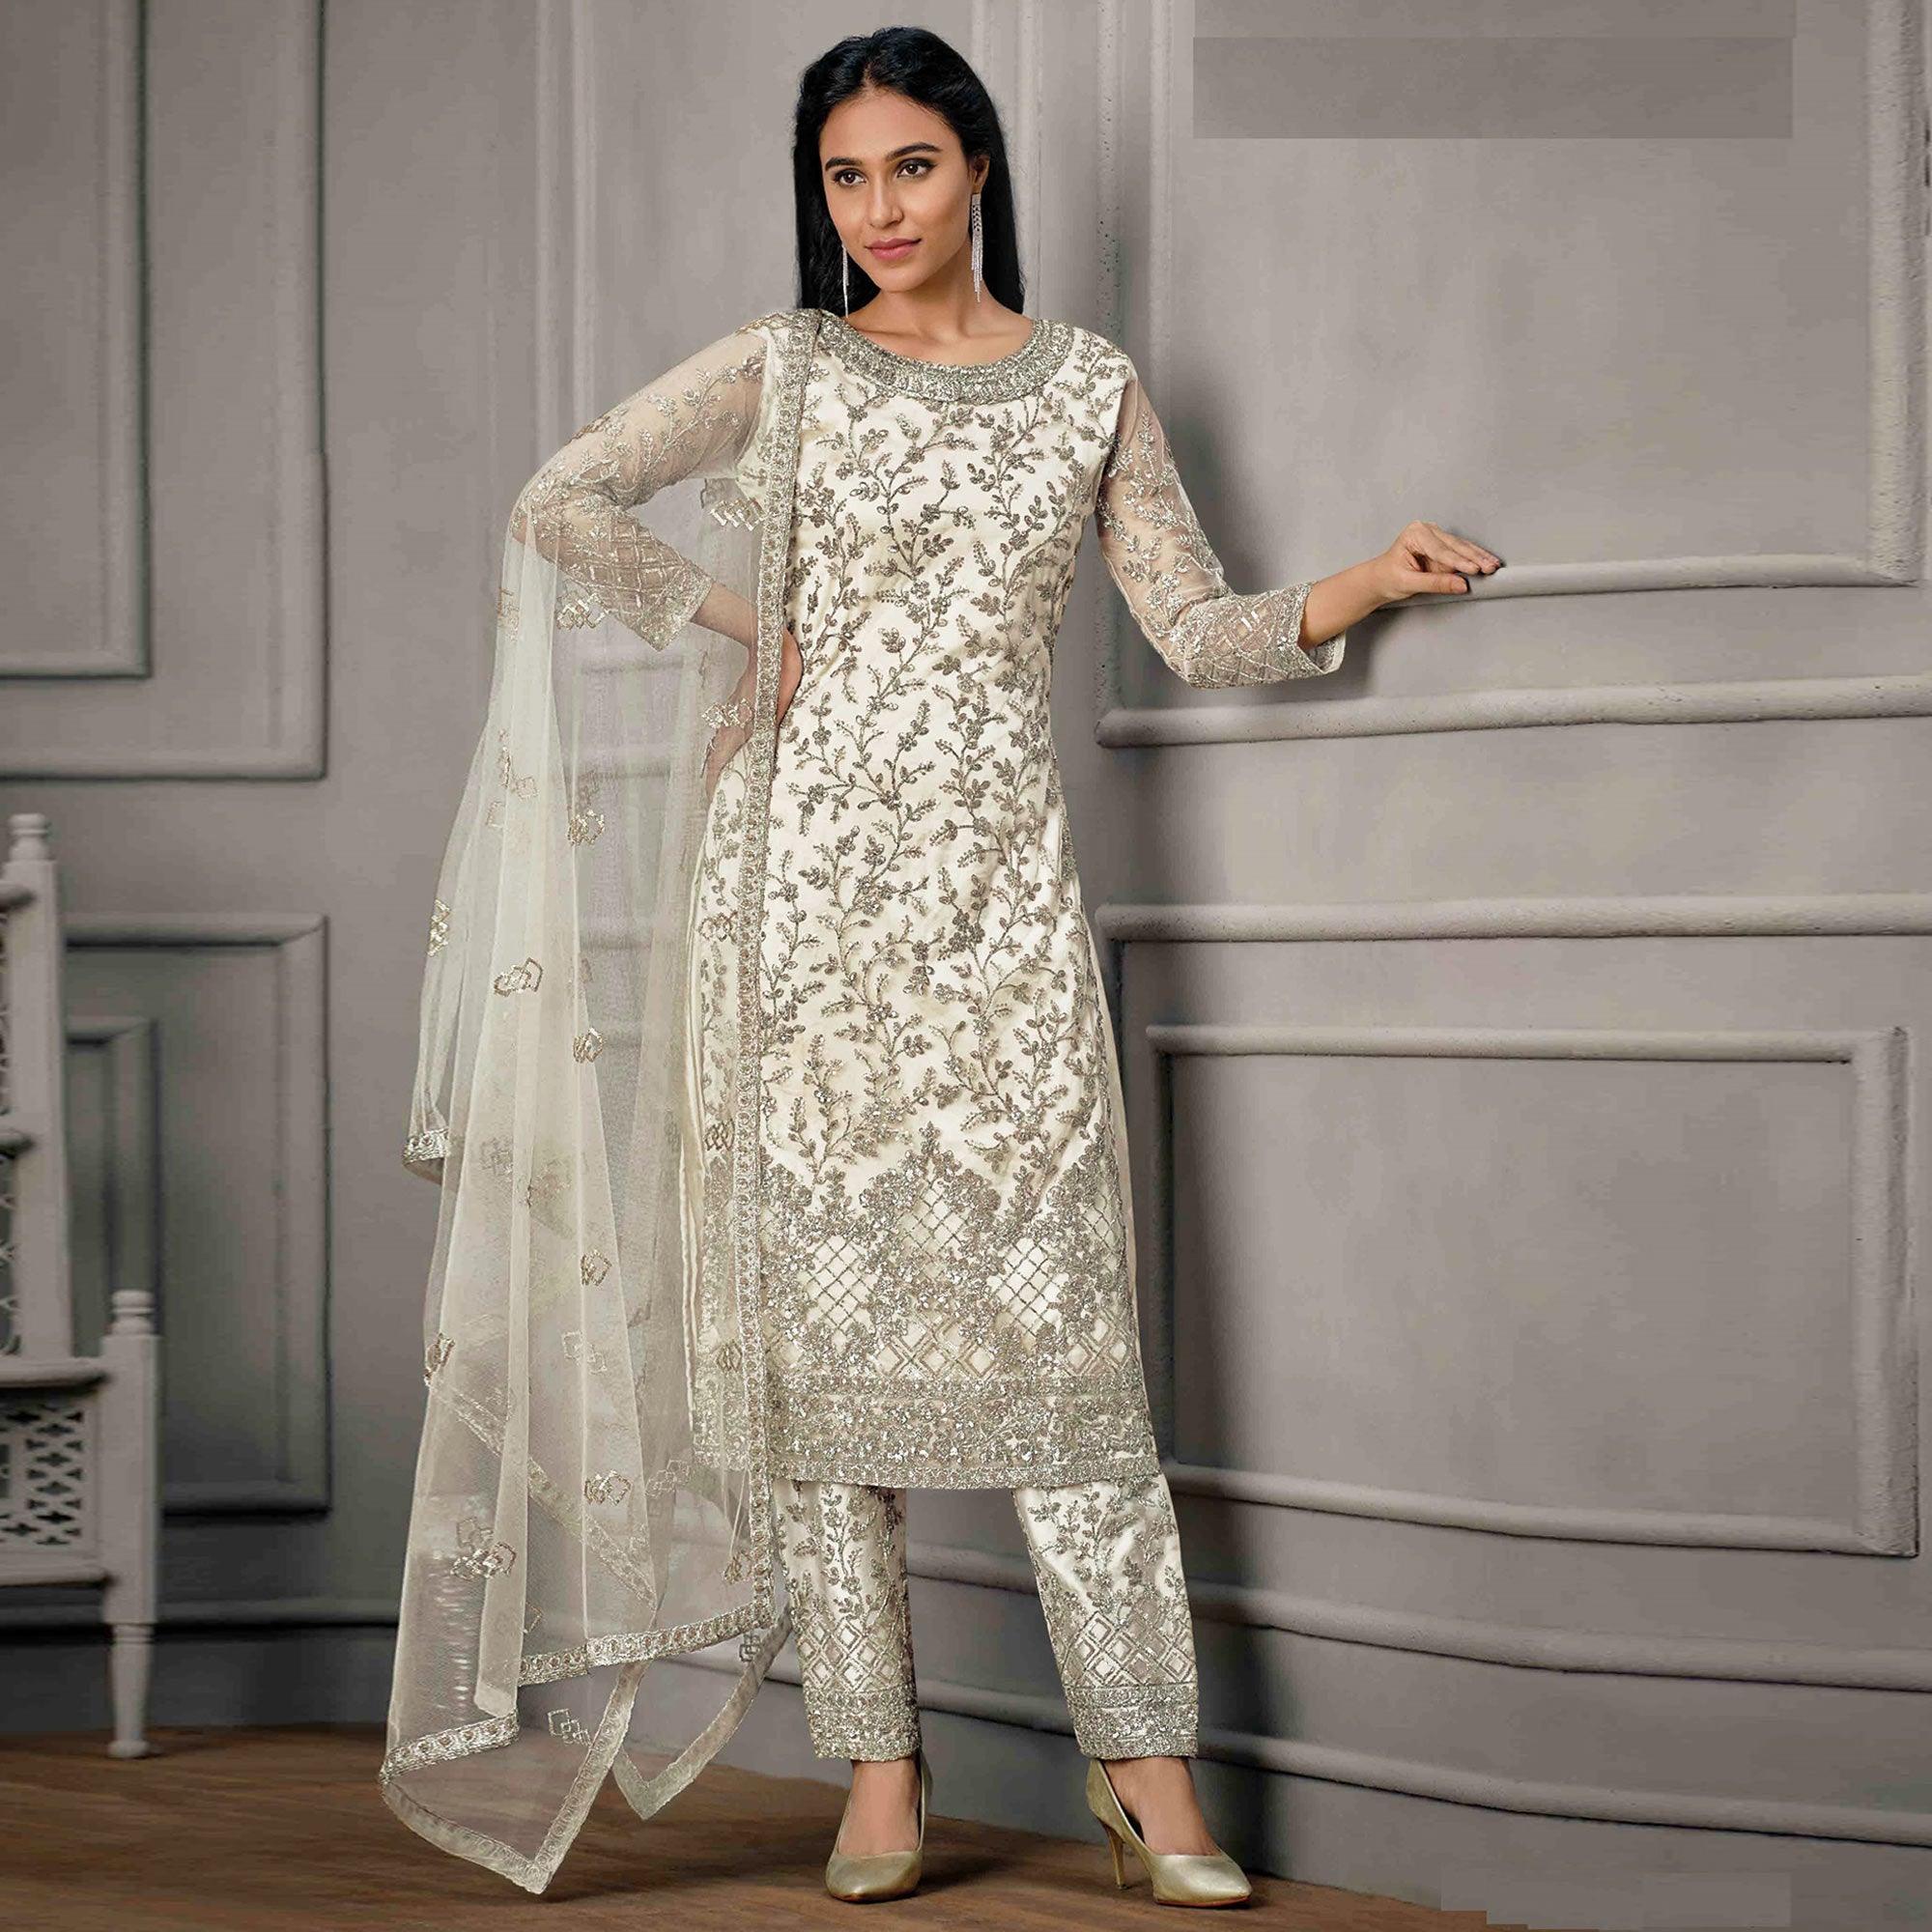 Latest 50 Net Salwar Suit Designs For Women (2022) - Tips and Beauty